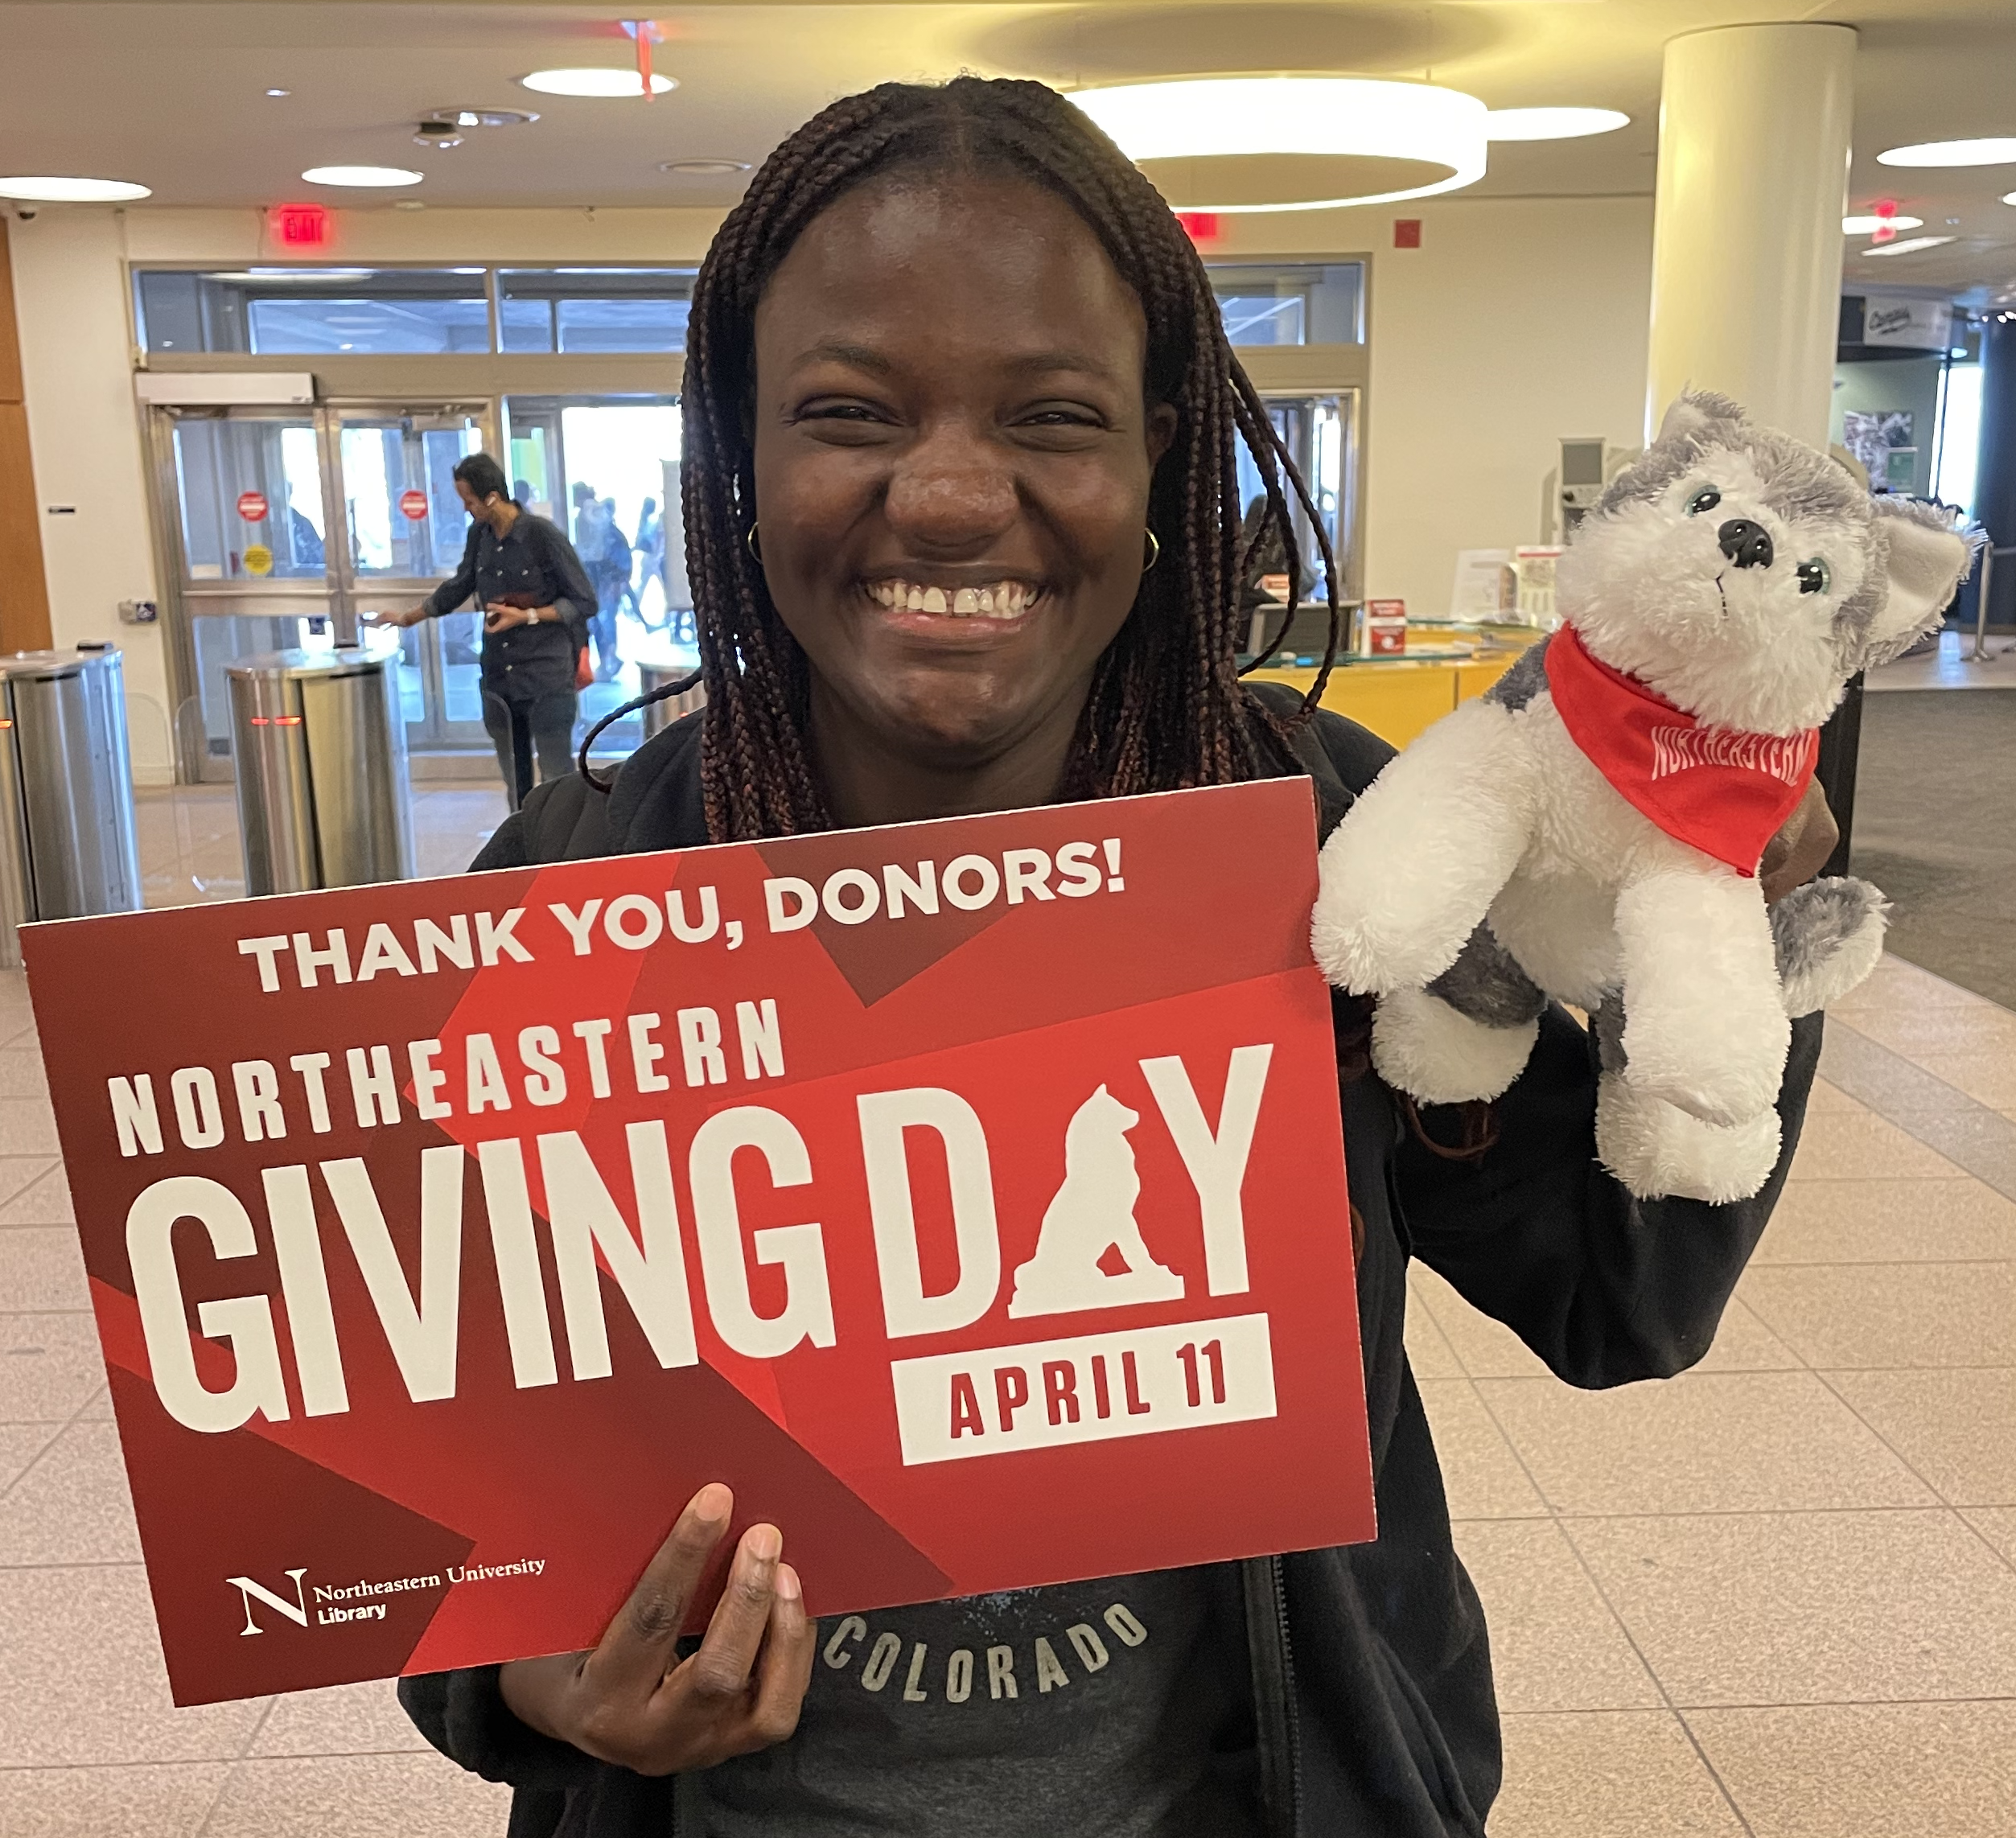 A student in Snell Library smiles while holding a "Thank you, donors!" Giving Day sign and a stuffed husky